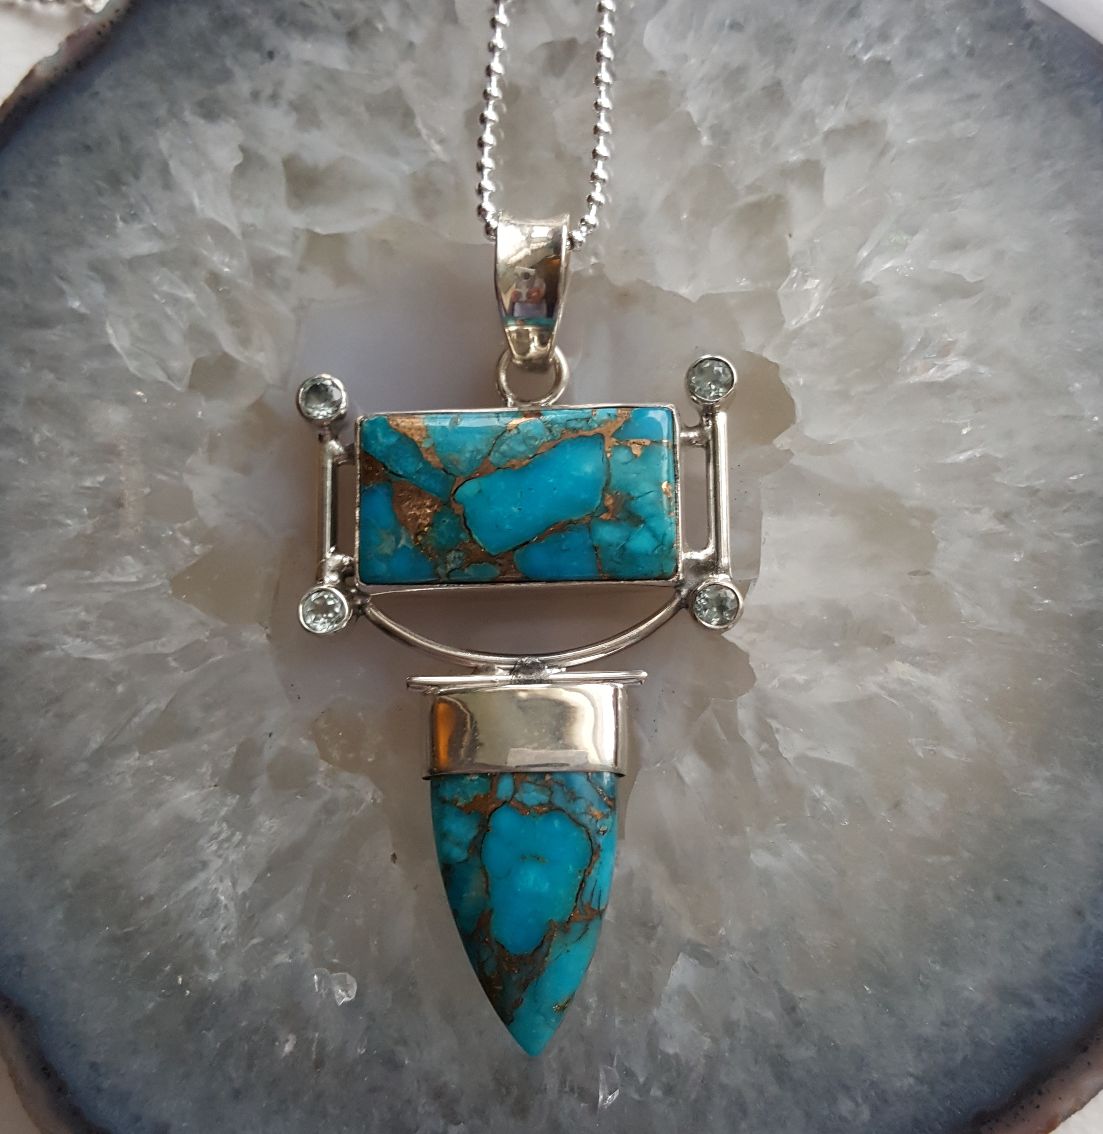 Fabulous Turquoise-copper in sterling frame on sterling ball chain